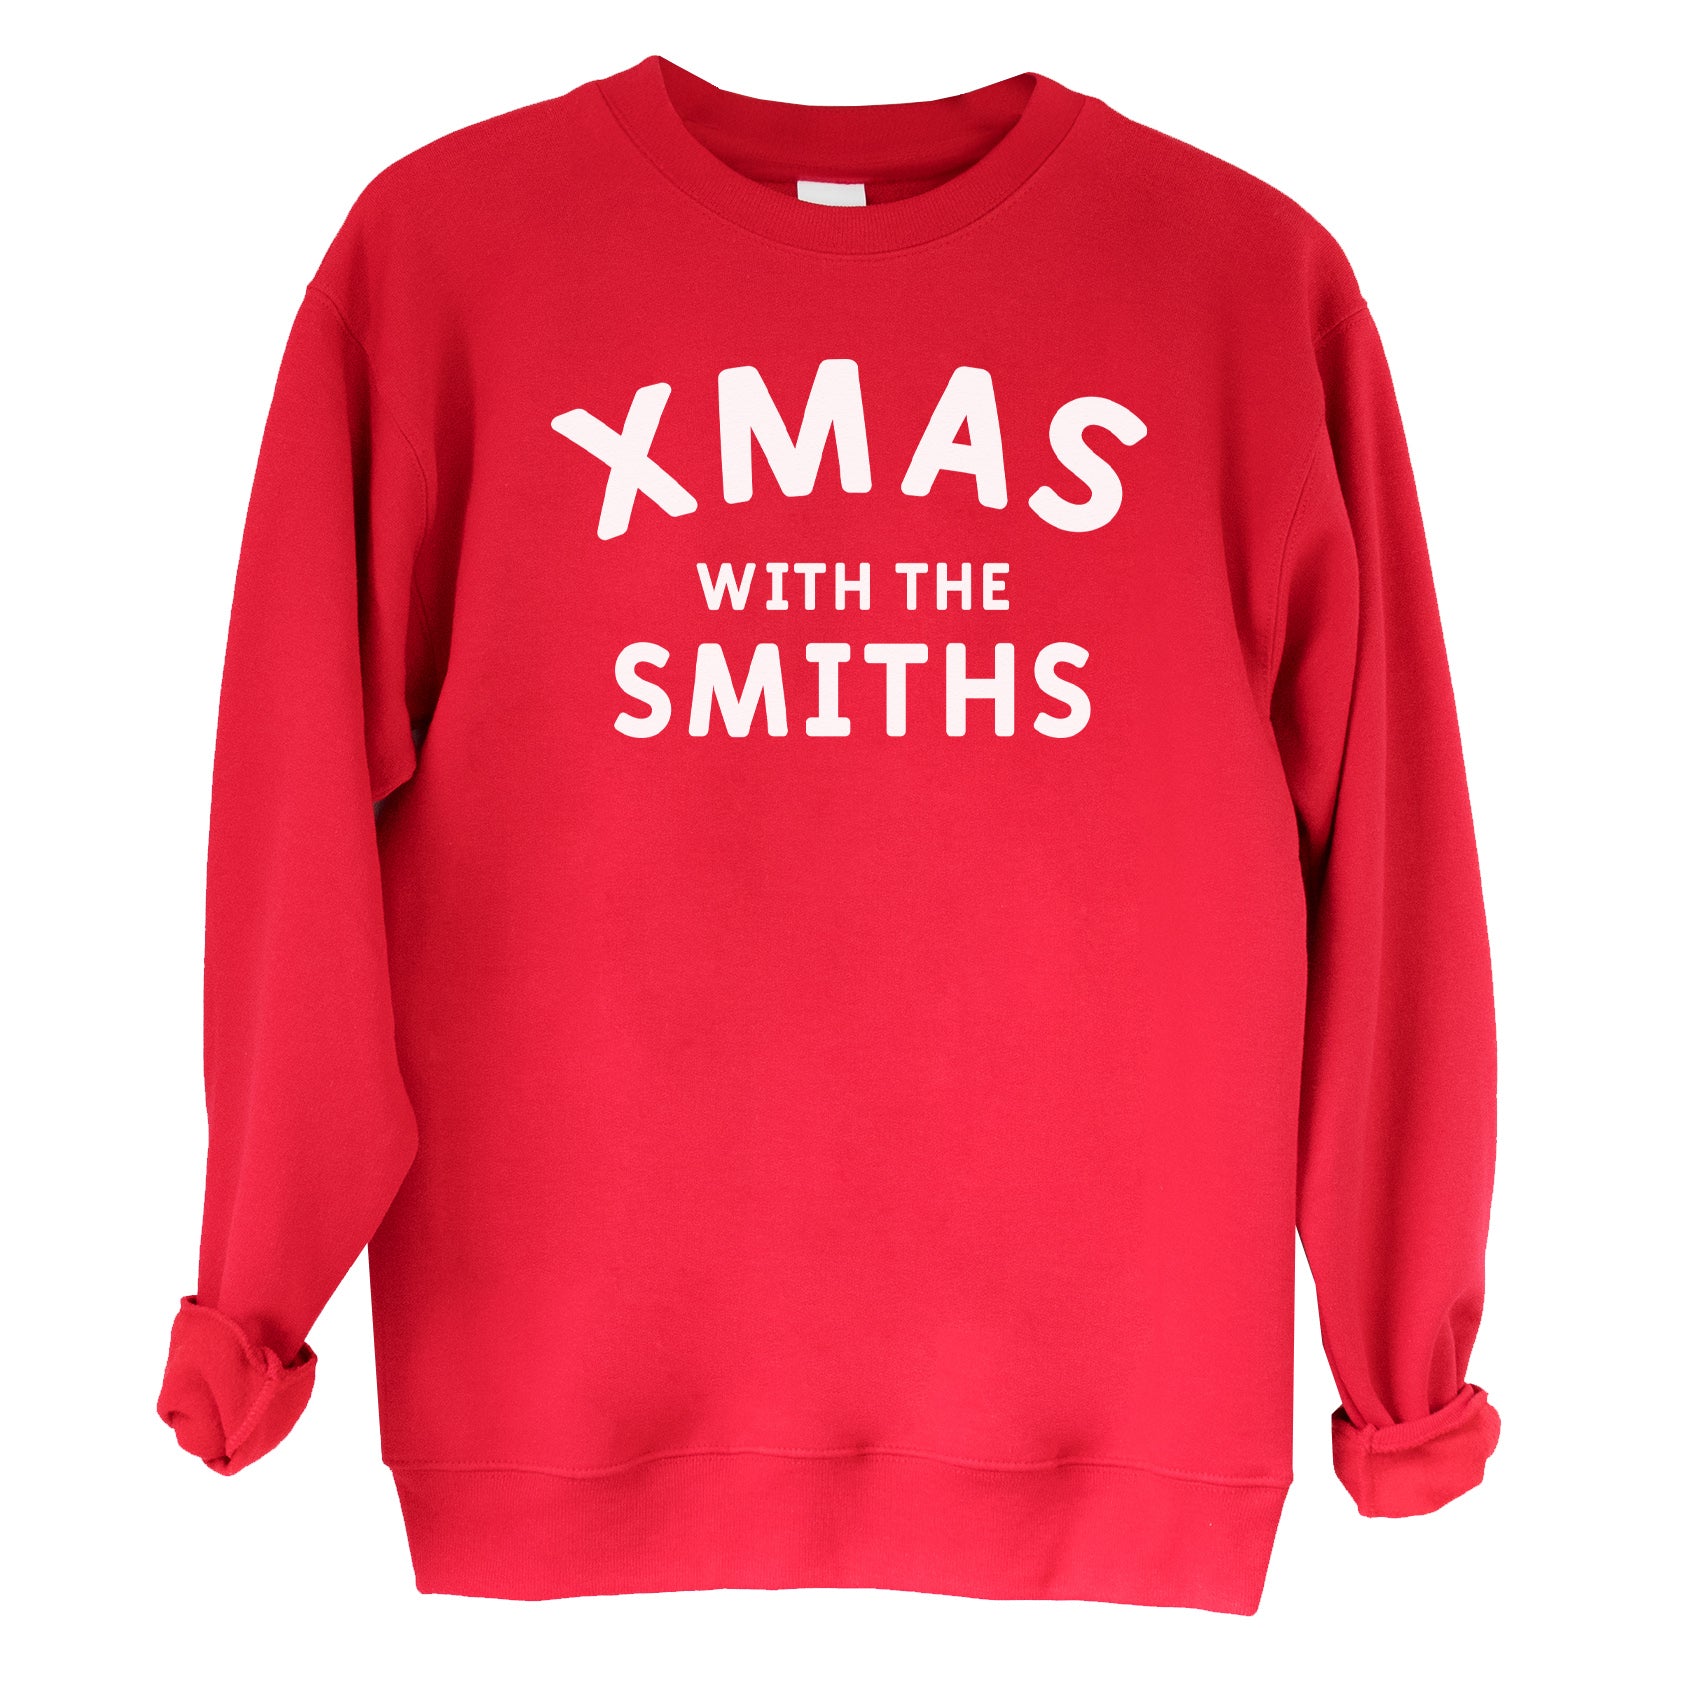 PERSONALISED Xmas With The Family Christmas Sweater - Christmas Jumper Sweatshirt - All Sizes